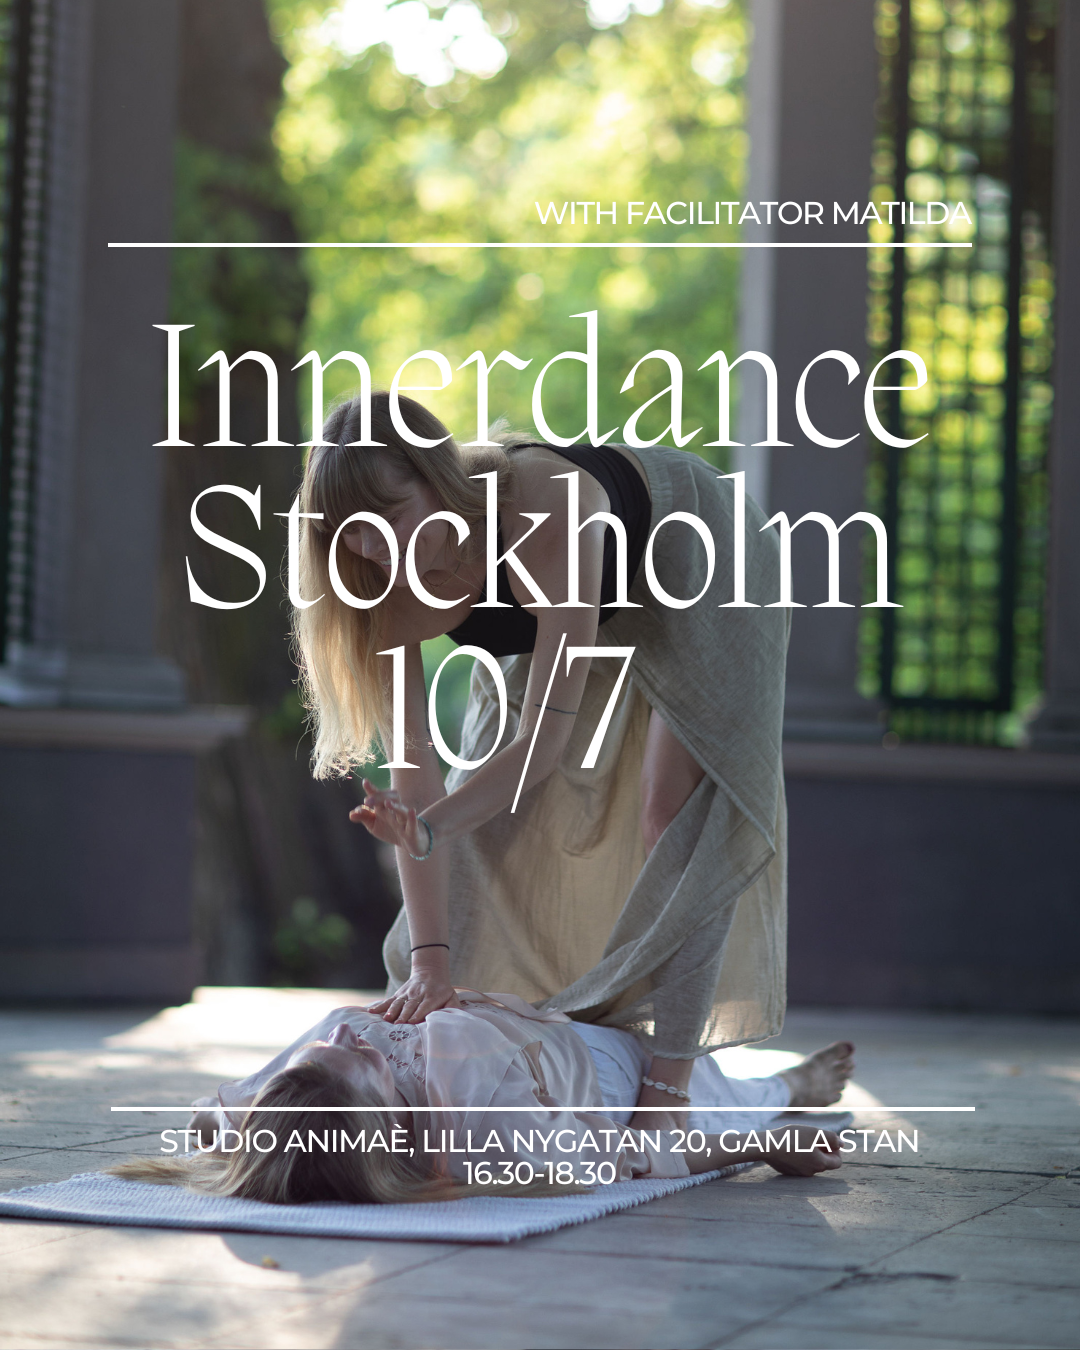 Innerdance with Innerdance Facilitator Matilda, in Stockholm, Sweden Sverige. Innerdance is a healing modality, that relaxes your nervous system and expands your consciousness.